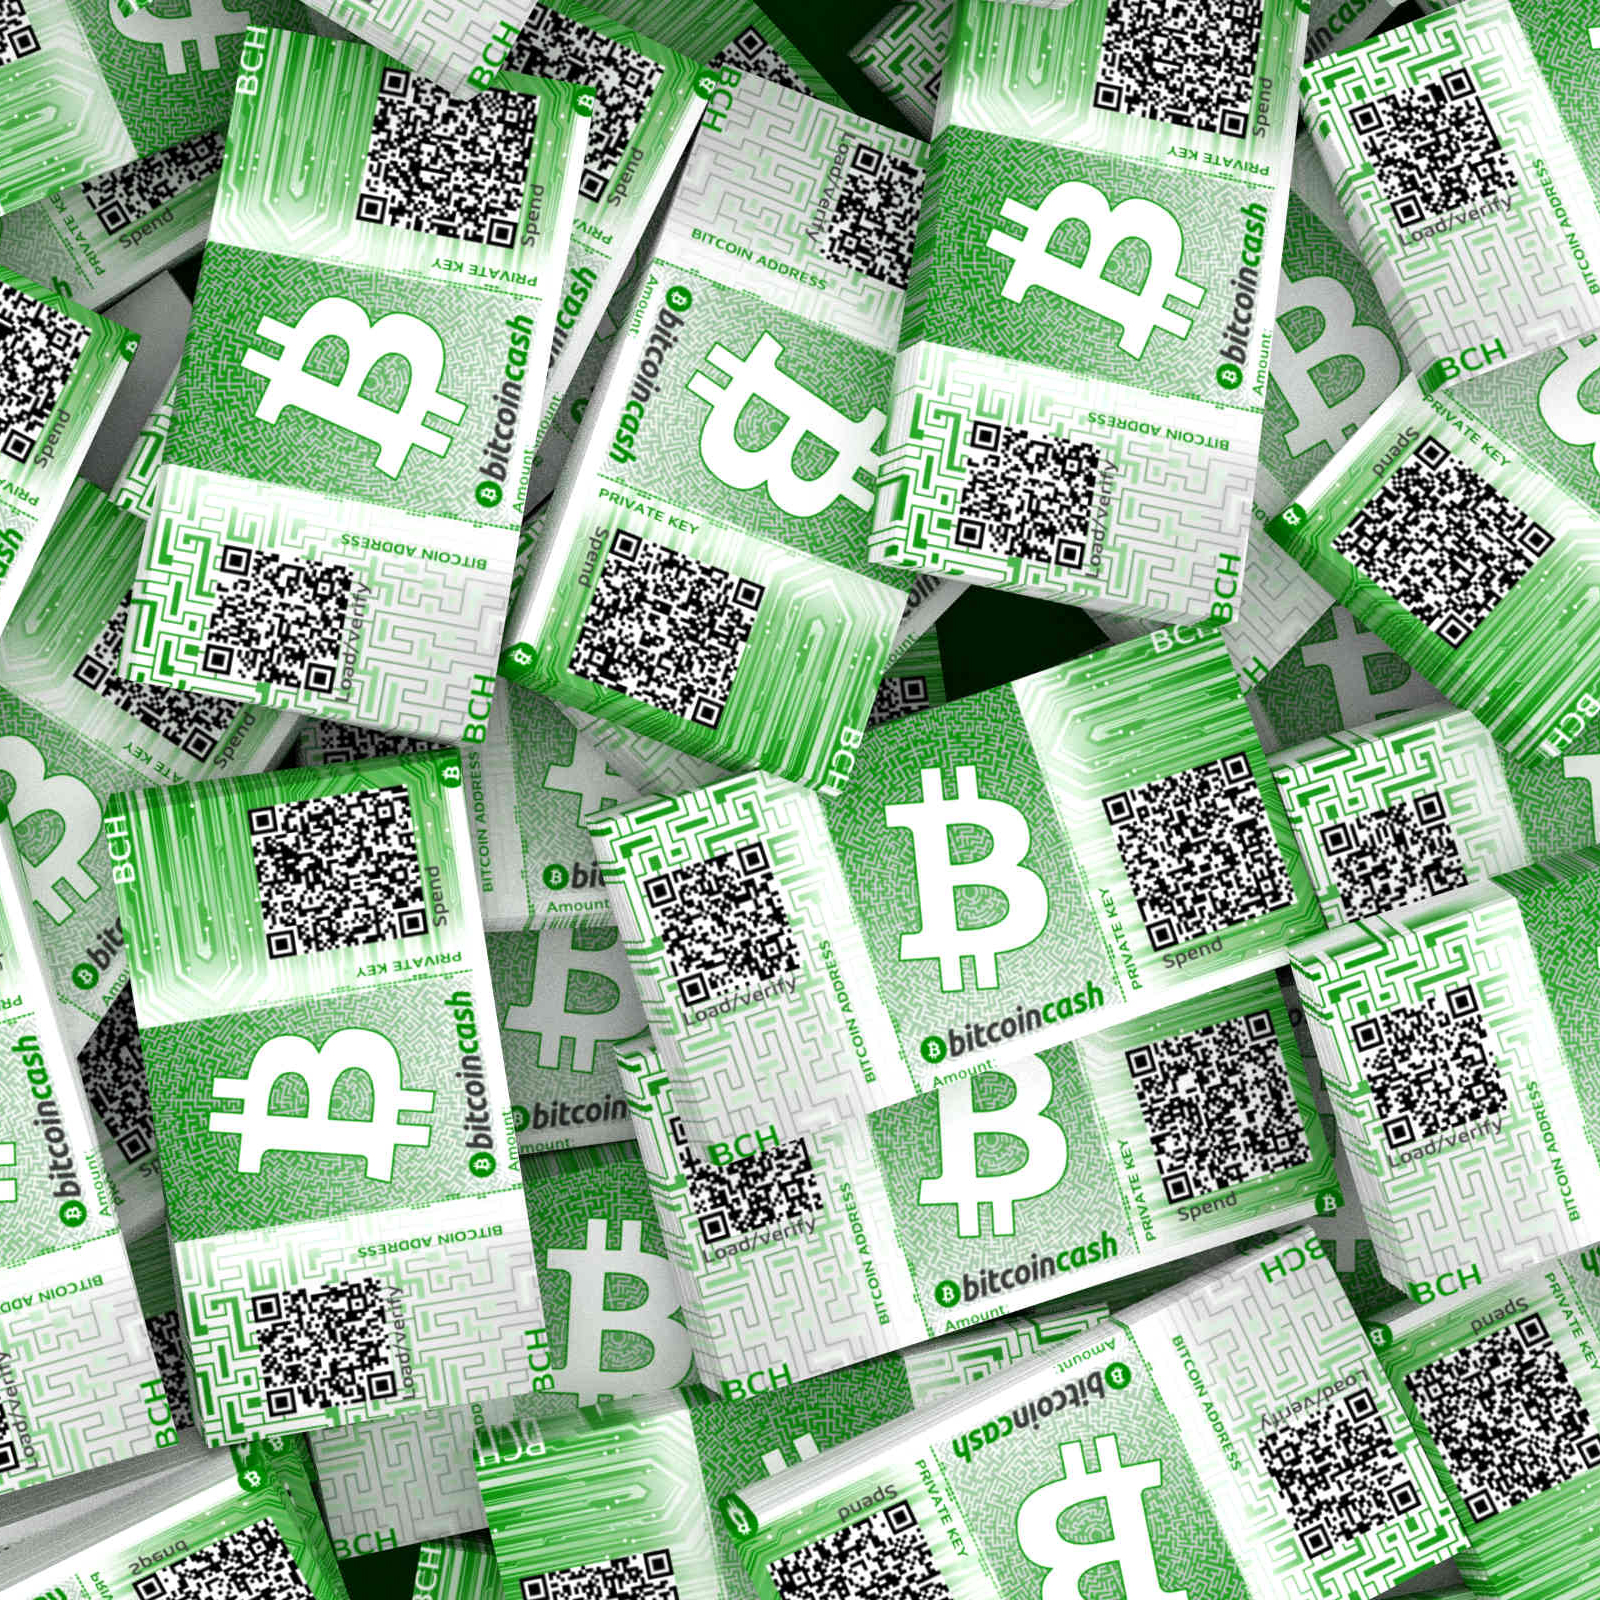 More Infrastructure Support Joins the Bitcoin Cash Ecosystem